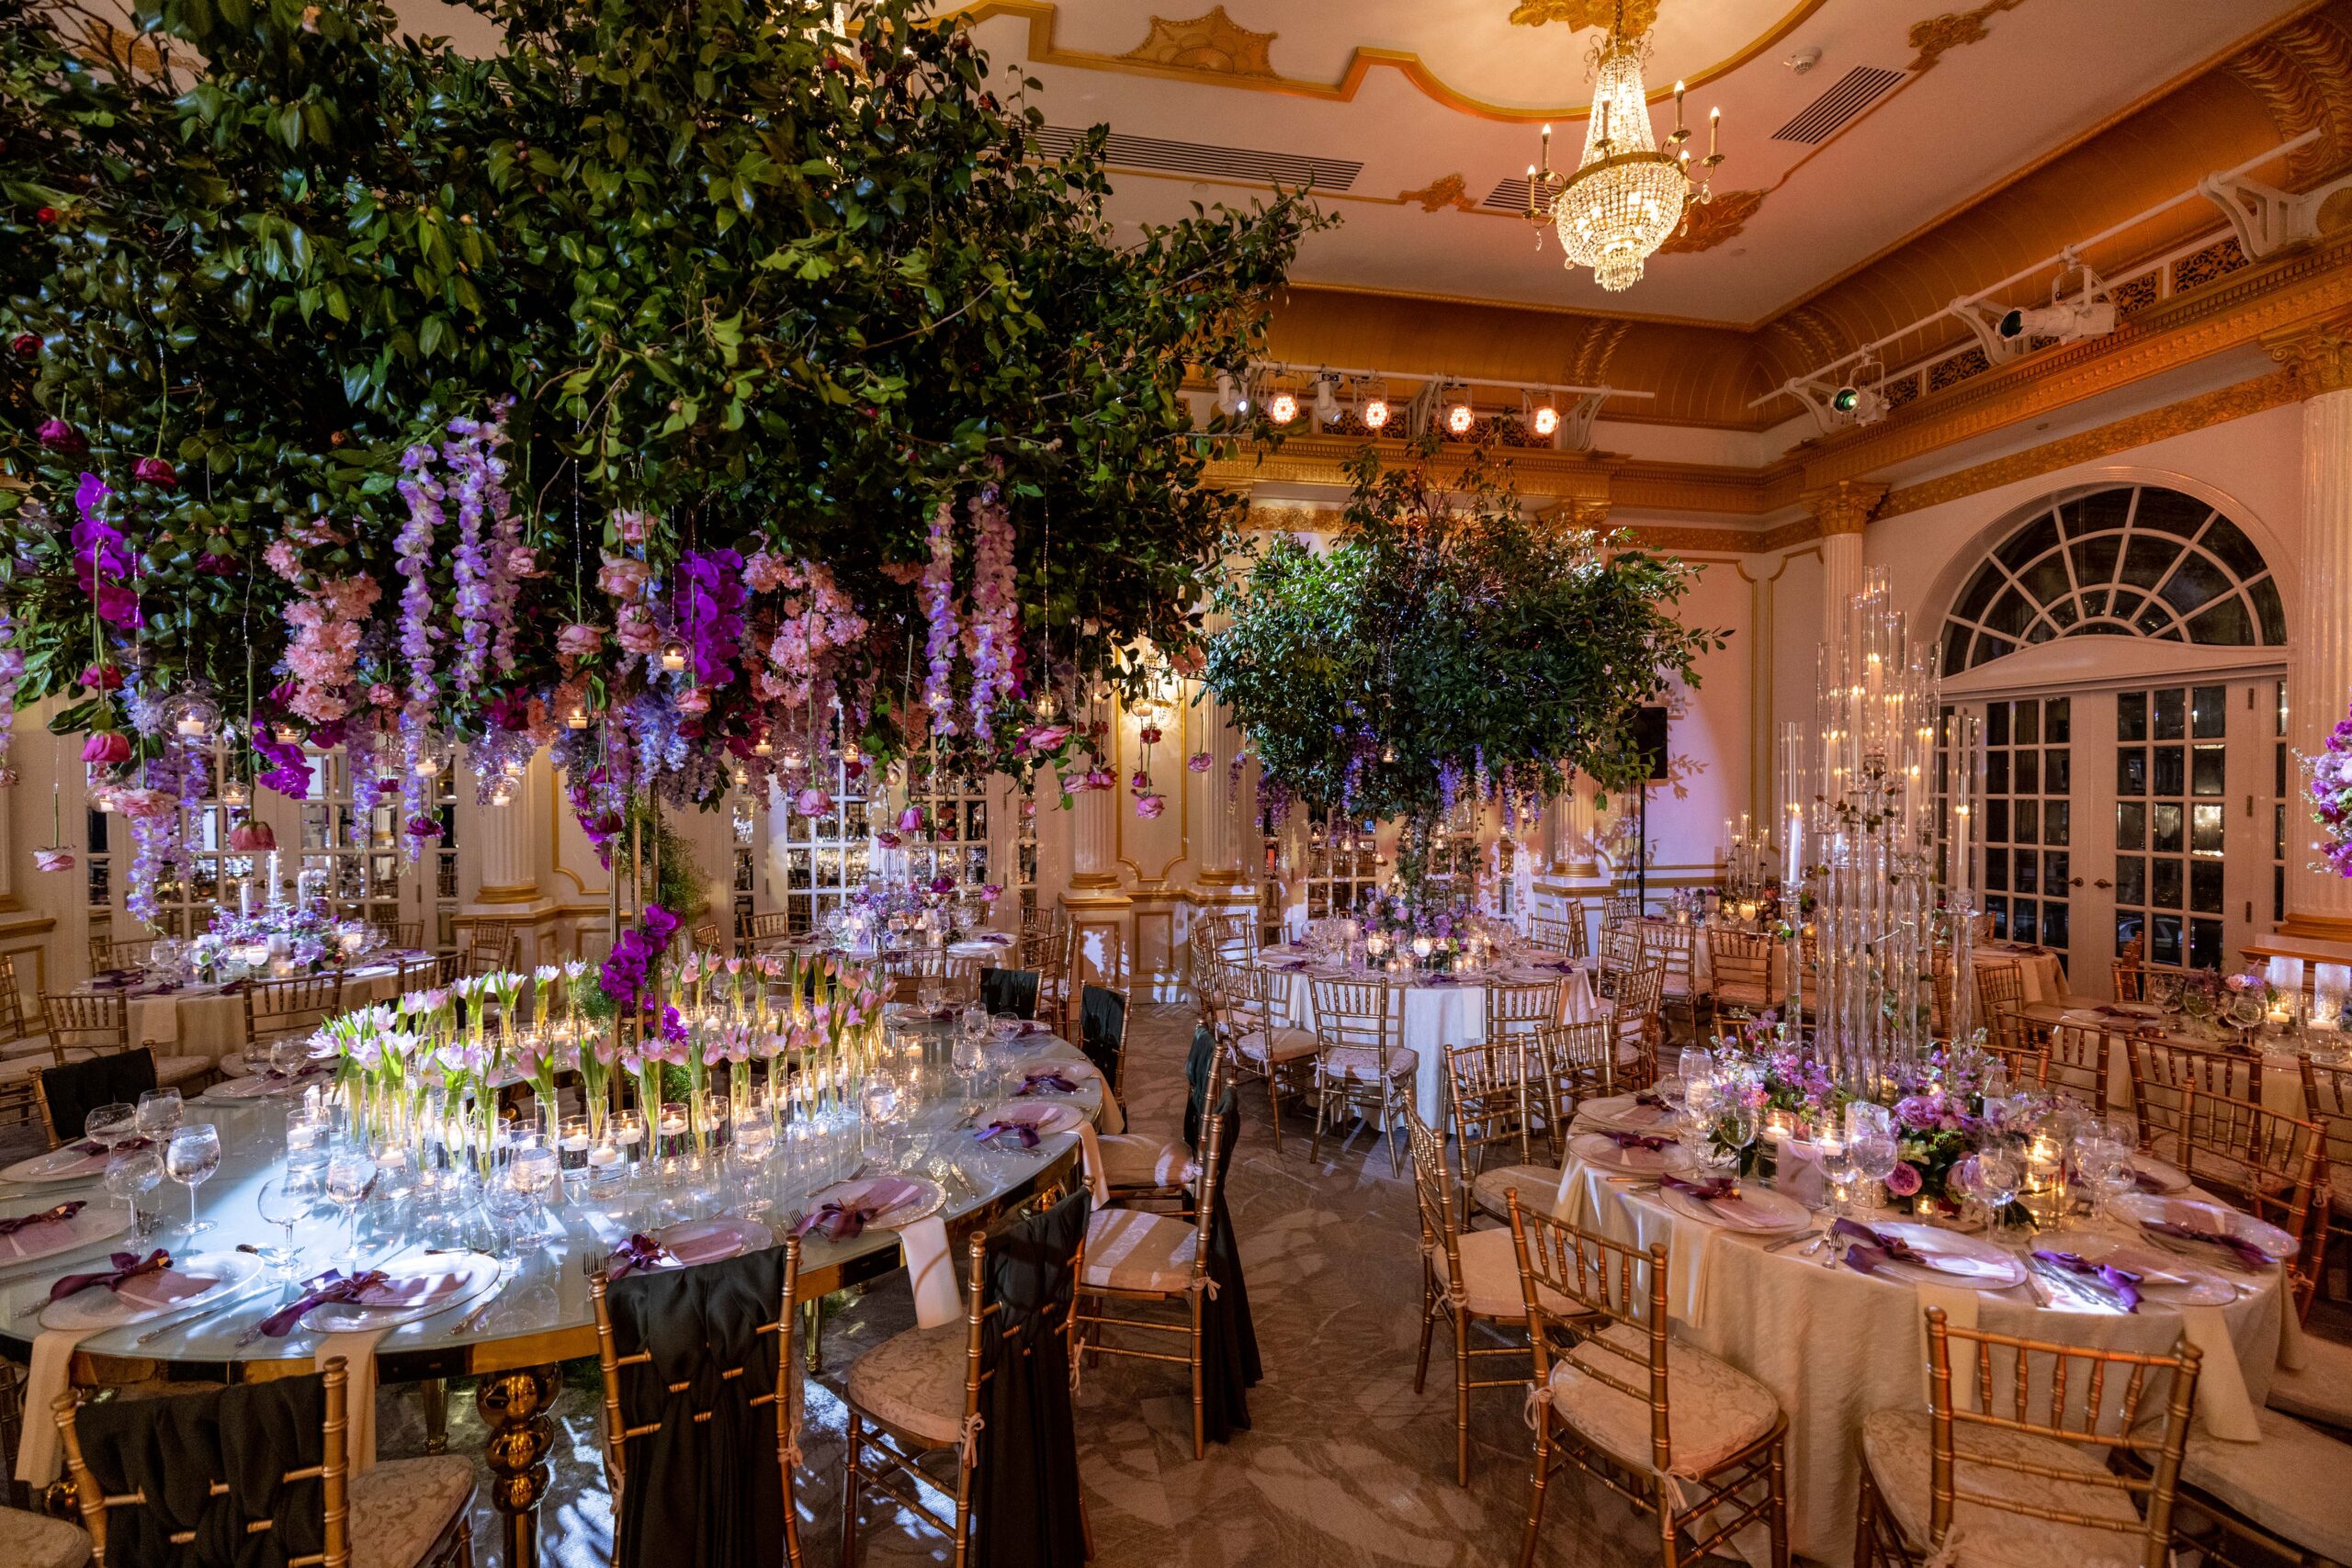 Elegant wedding tree table centerpieces complemented by pink and purple flowers and candles.